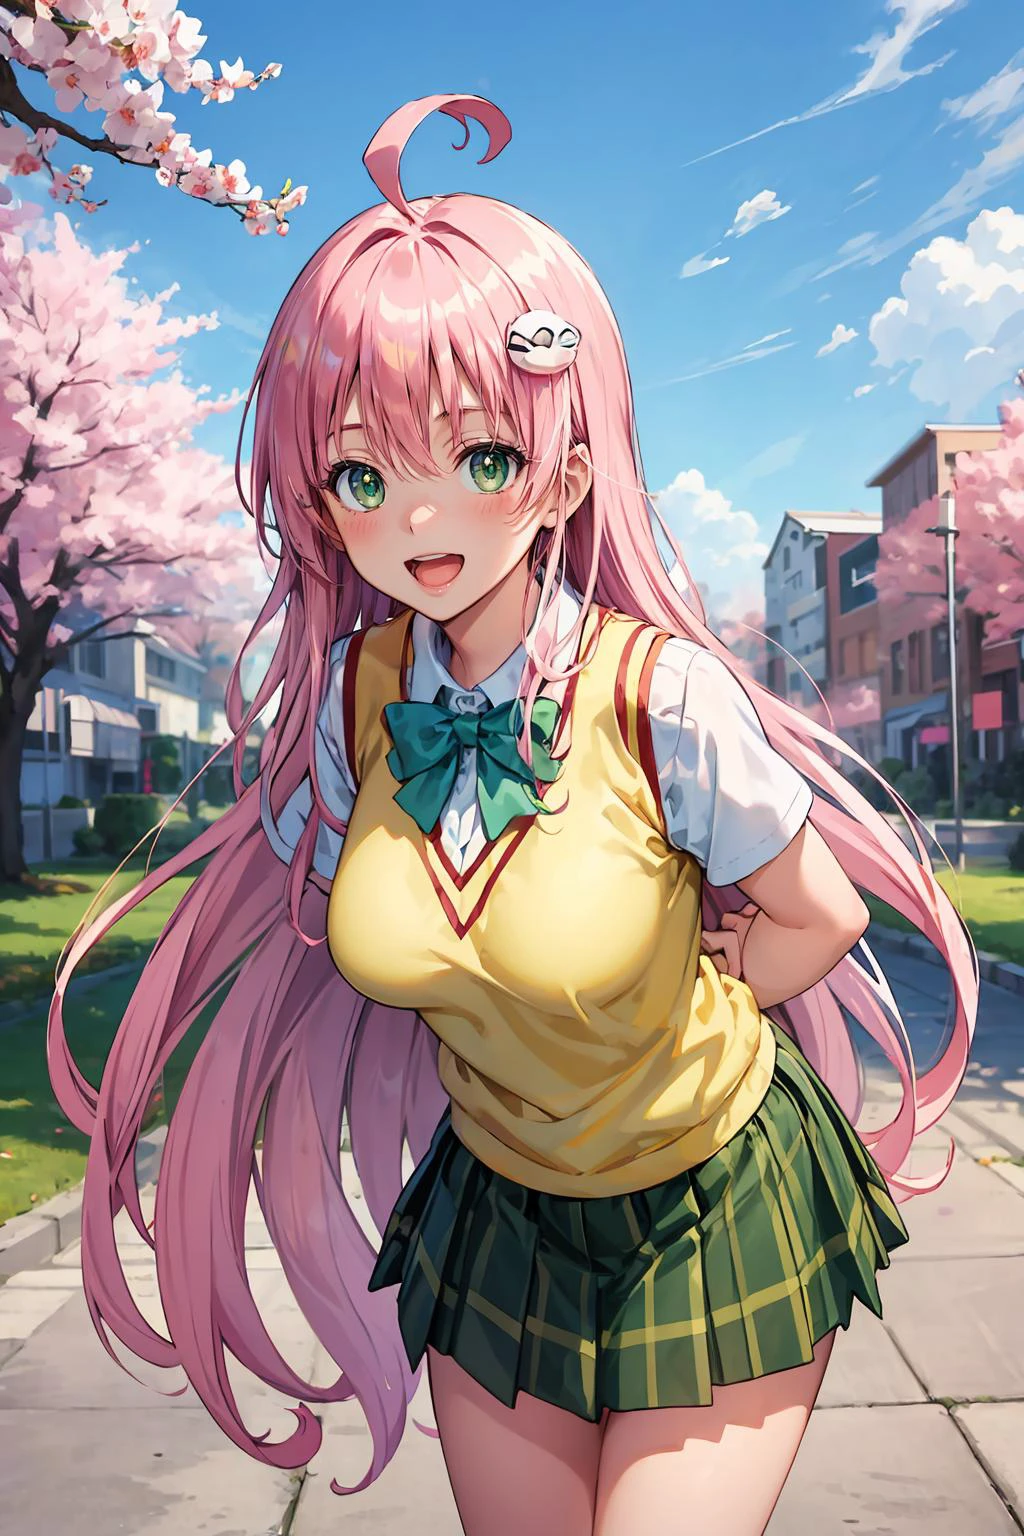 Anime girl with pink hair and green eyes in a school uniform 